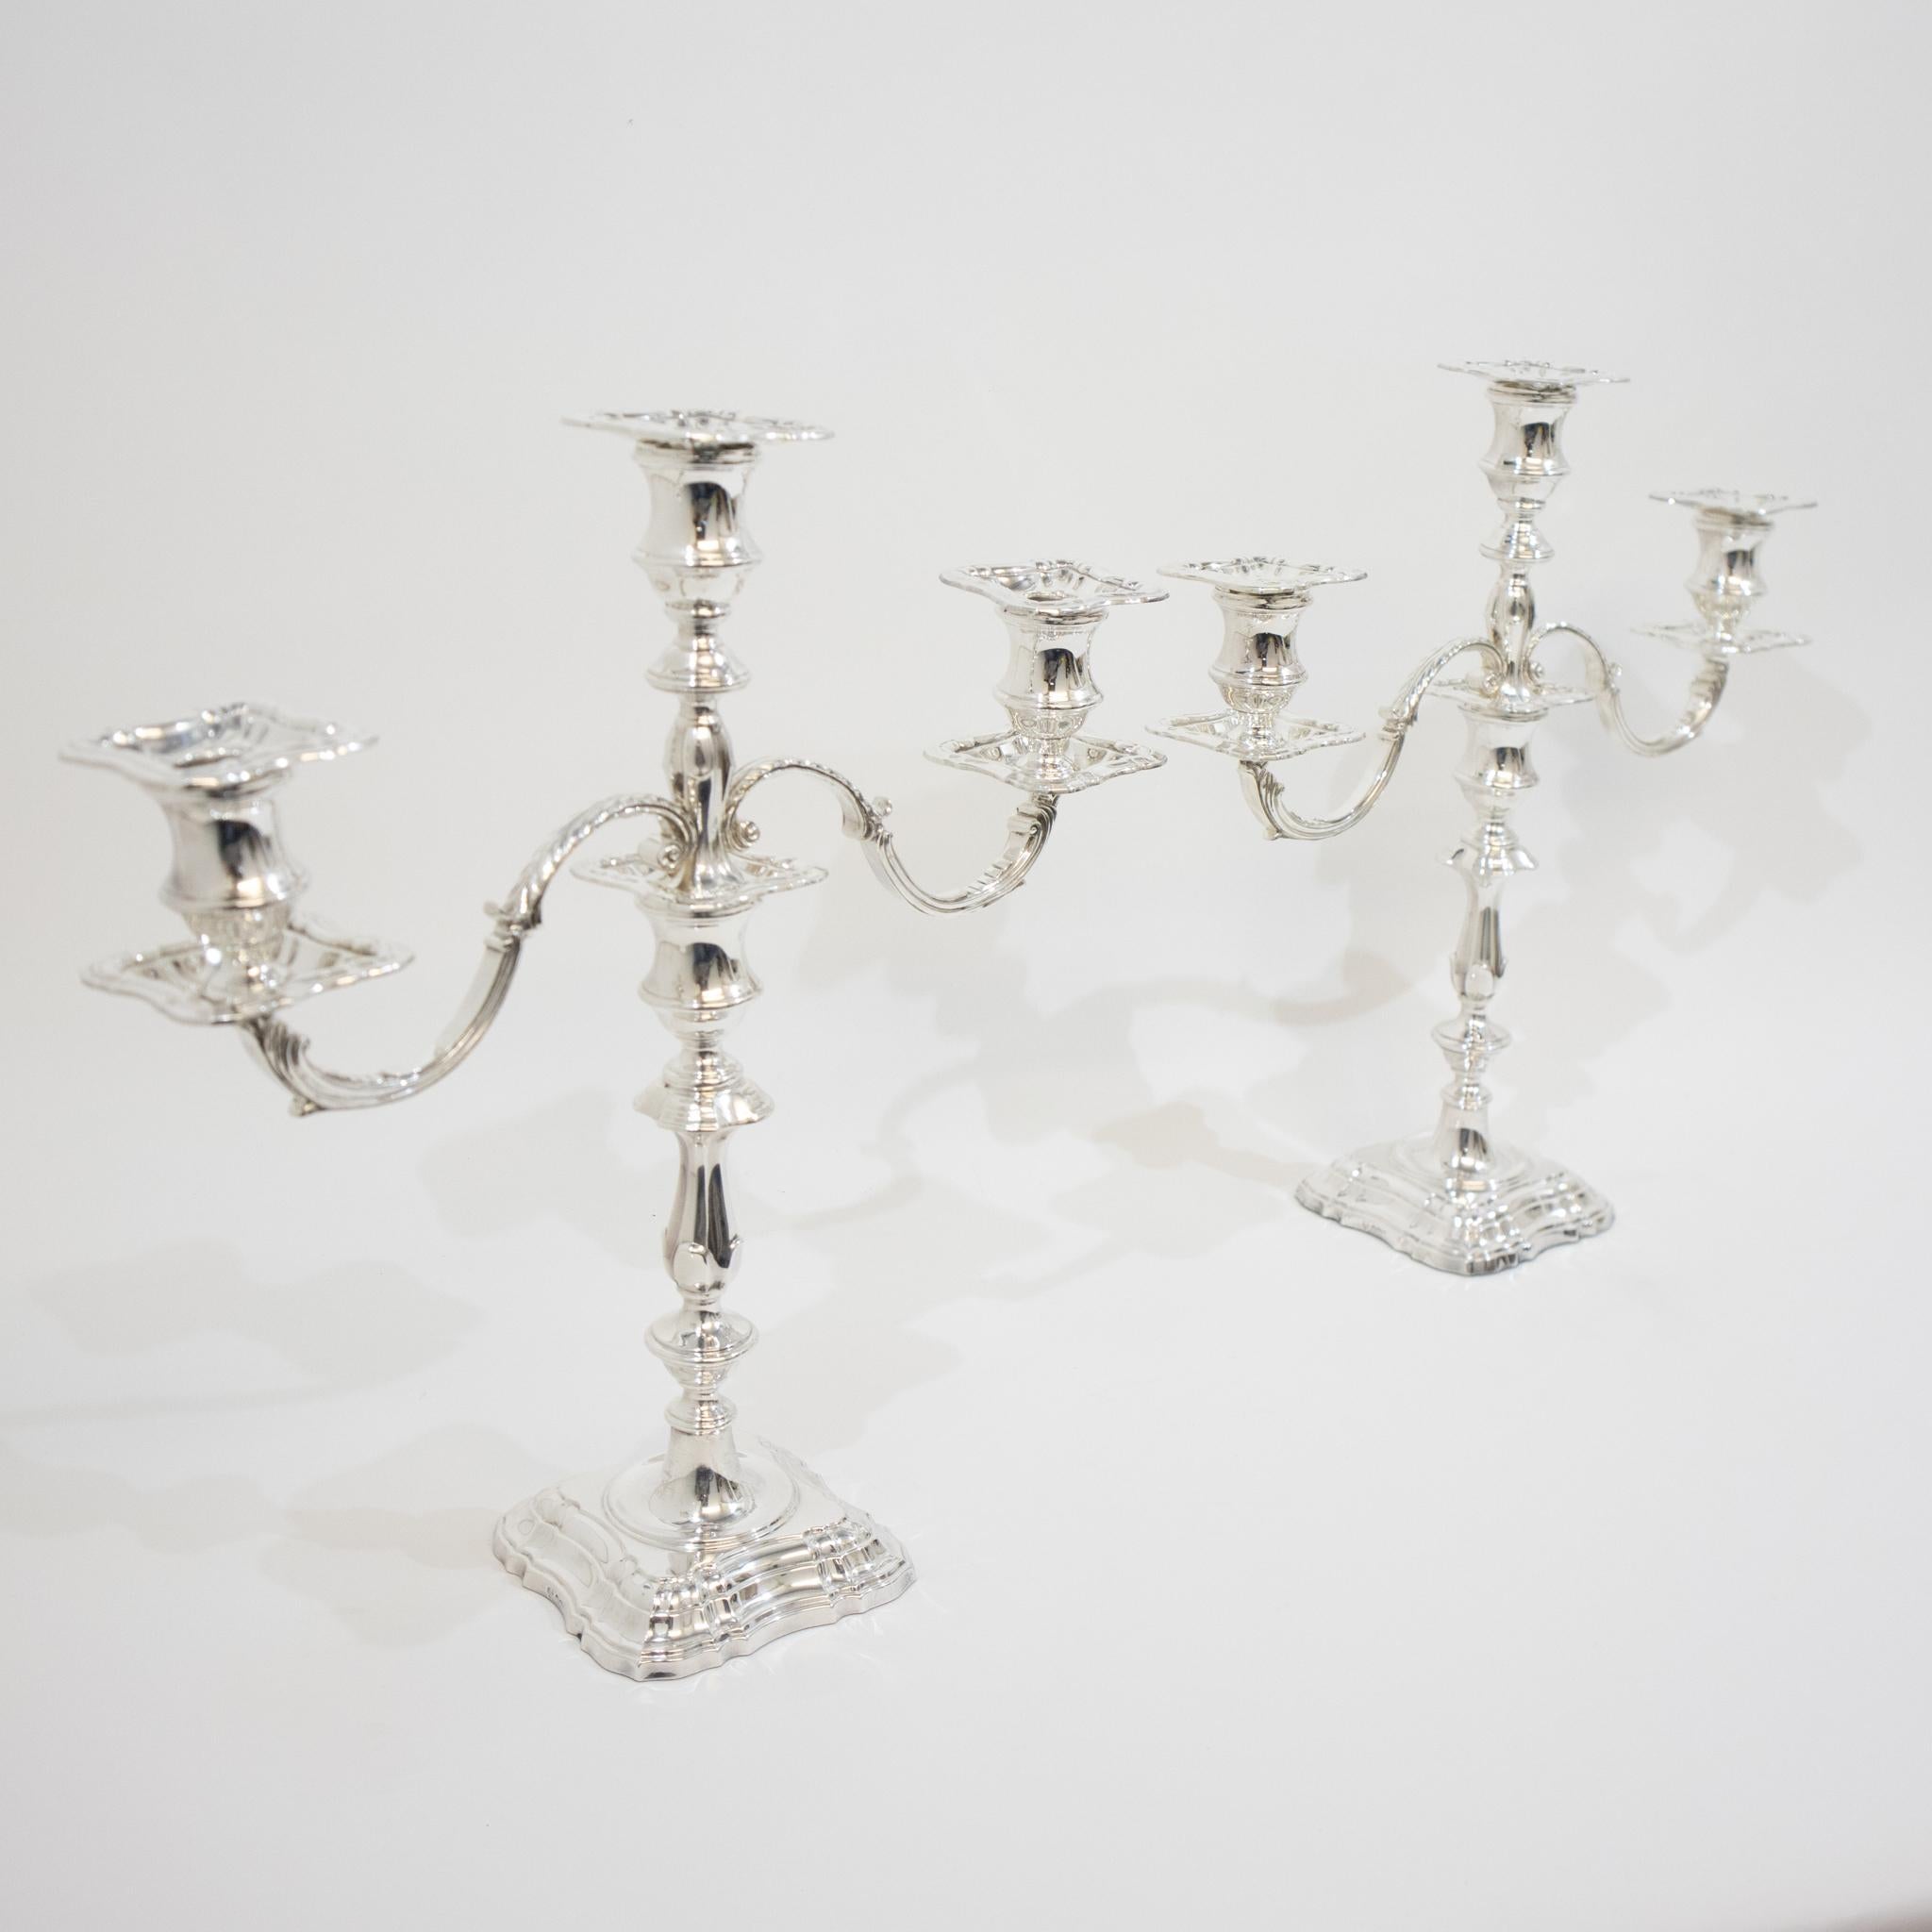 A stunning pair of silver candelabra in fantastic condition. Classic in form with traditional sconces, feathered arms. The shoulder, knop and column lead down to a large graduated base. The arms detach enabling the sticks to be used separately.